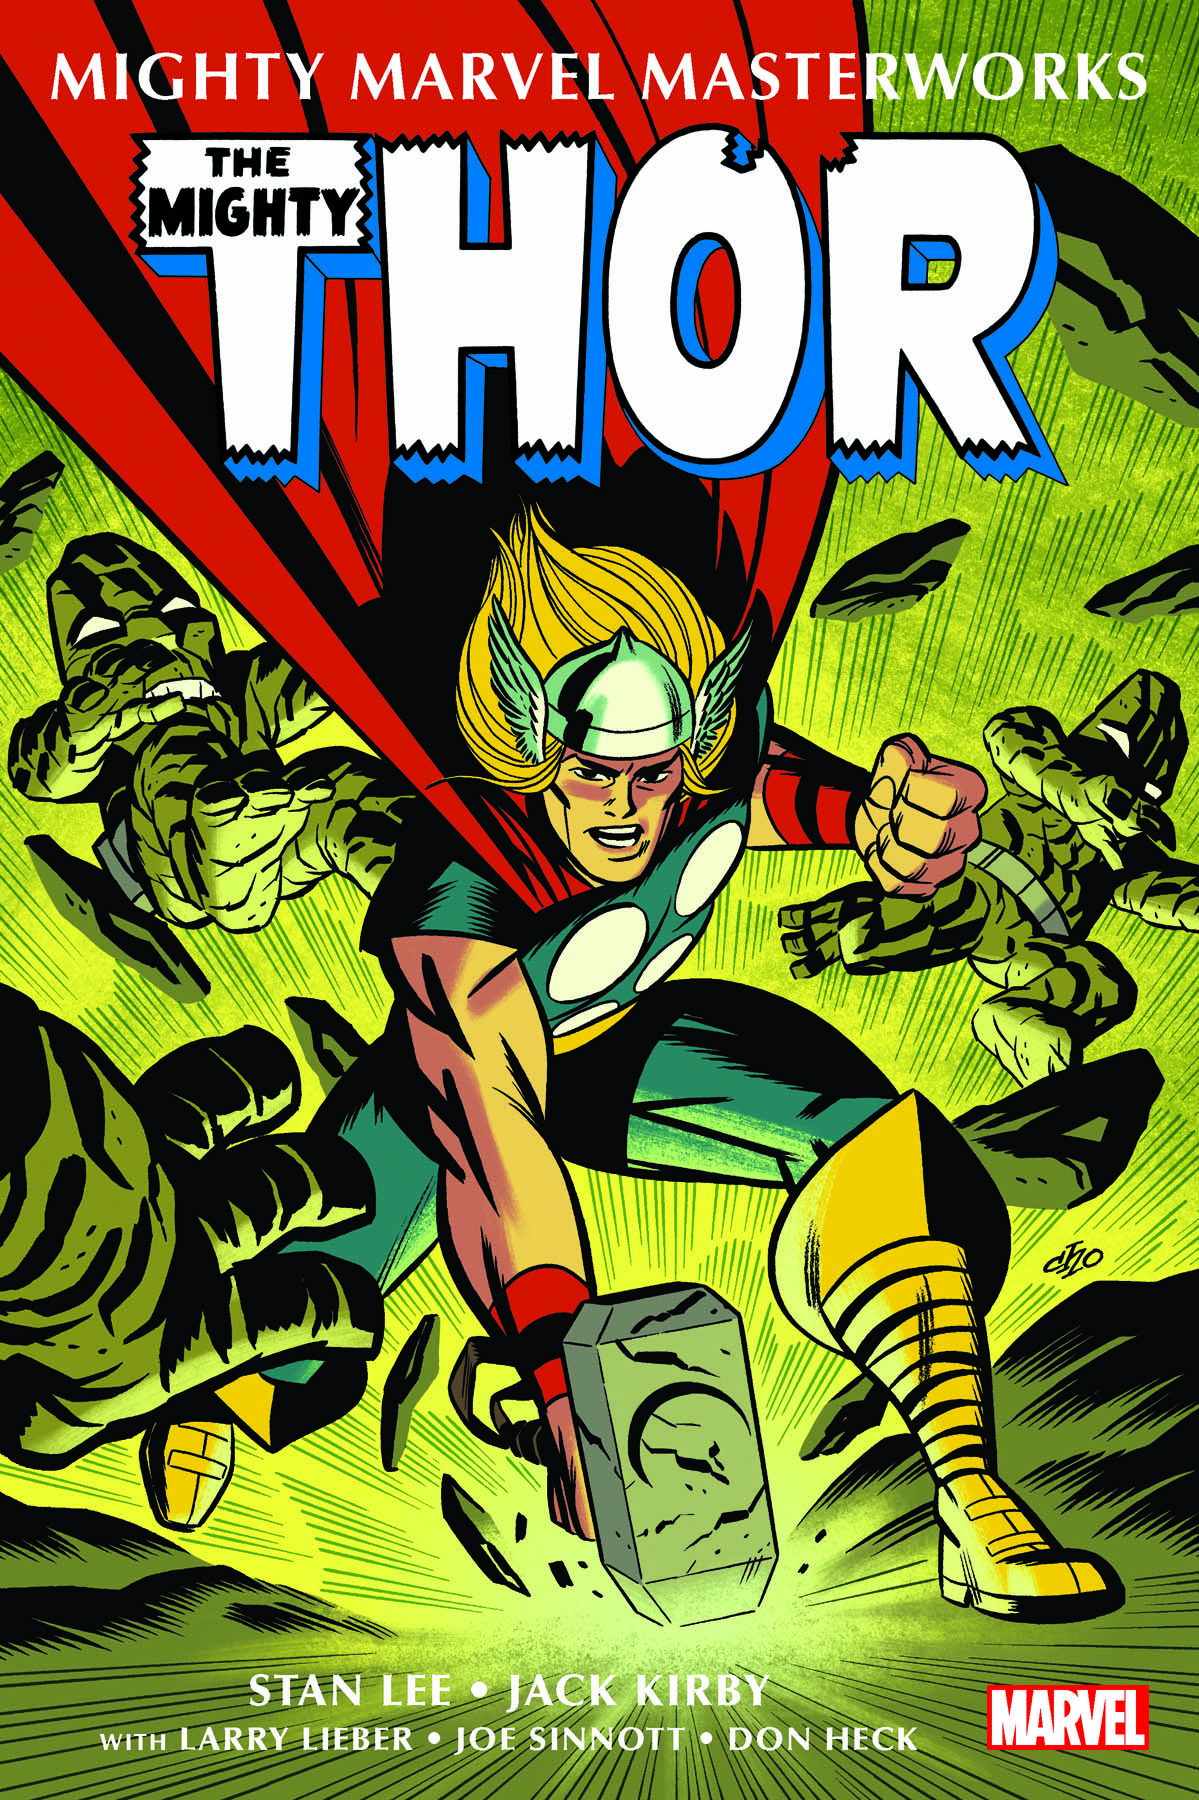 Mighty Marvel Masterworks: The Mighty Thor Vol. 1 - The Vengeance Of Loki (Trade Paperback)